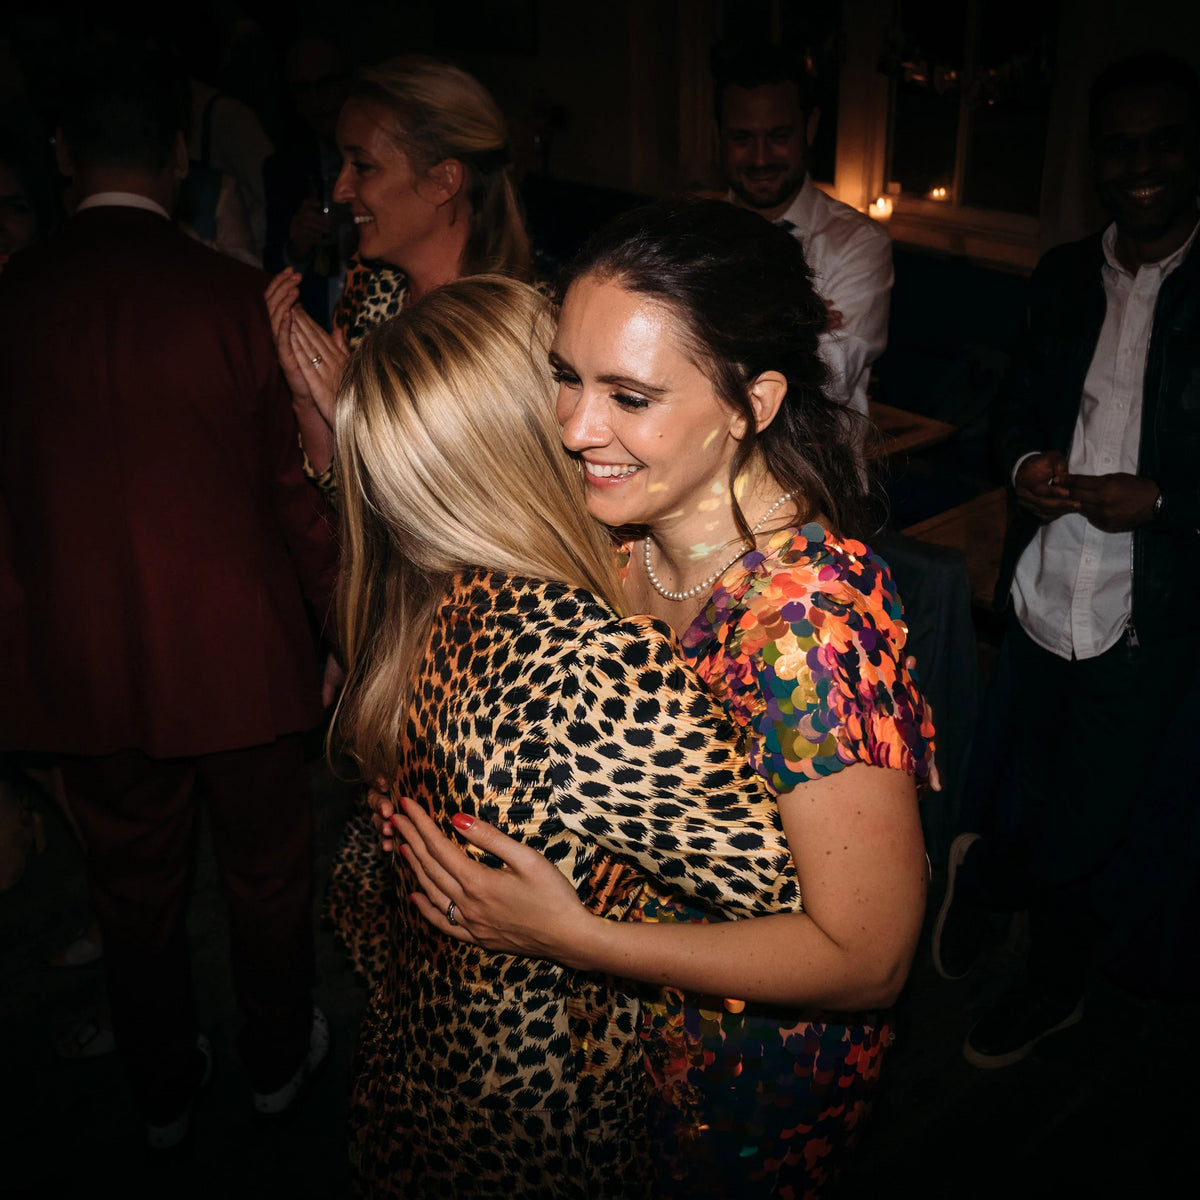 A bride wearing an orange sequin jumpsuit embraces her bridesmaid who is wearing a leopard print dress.